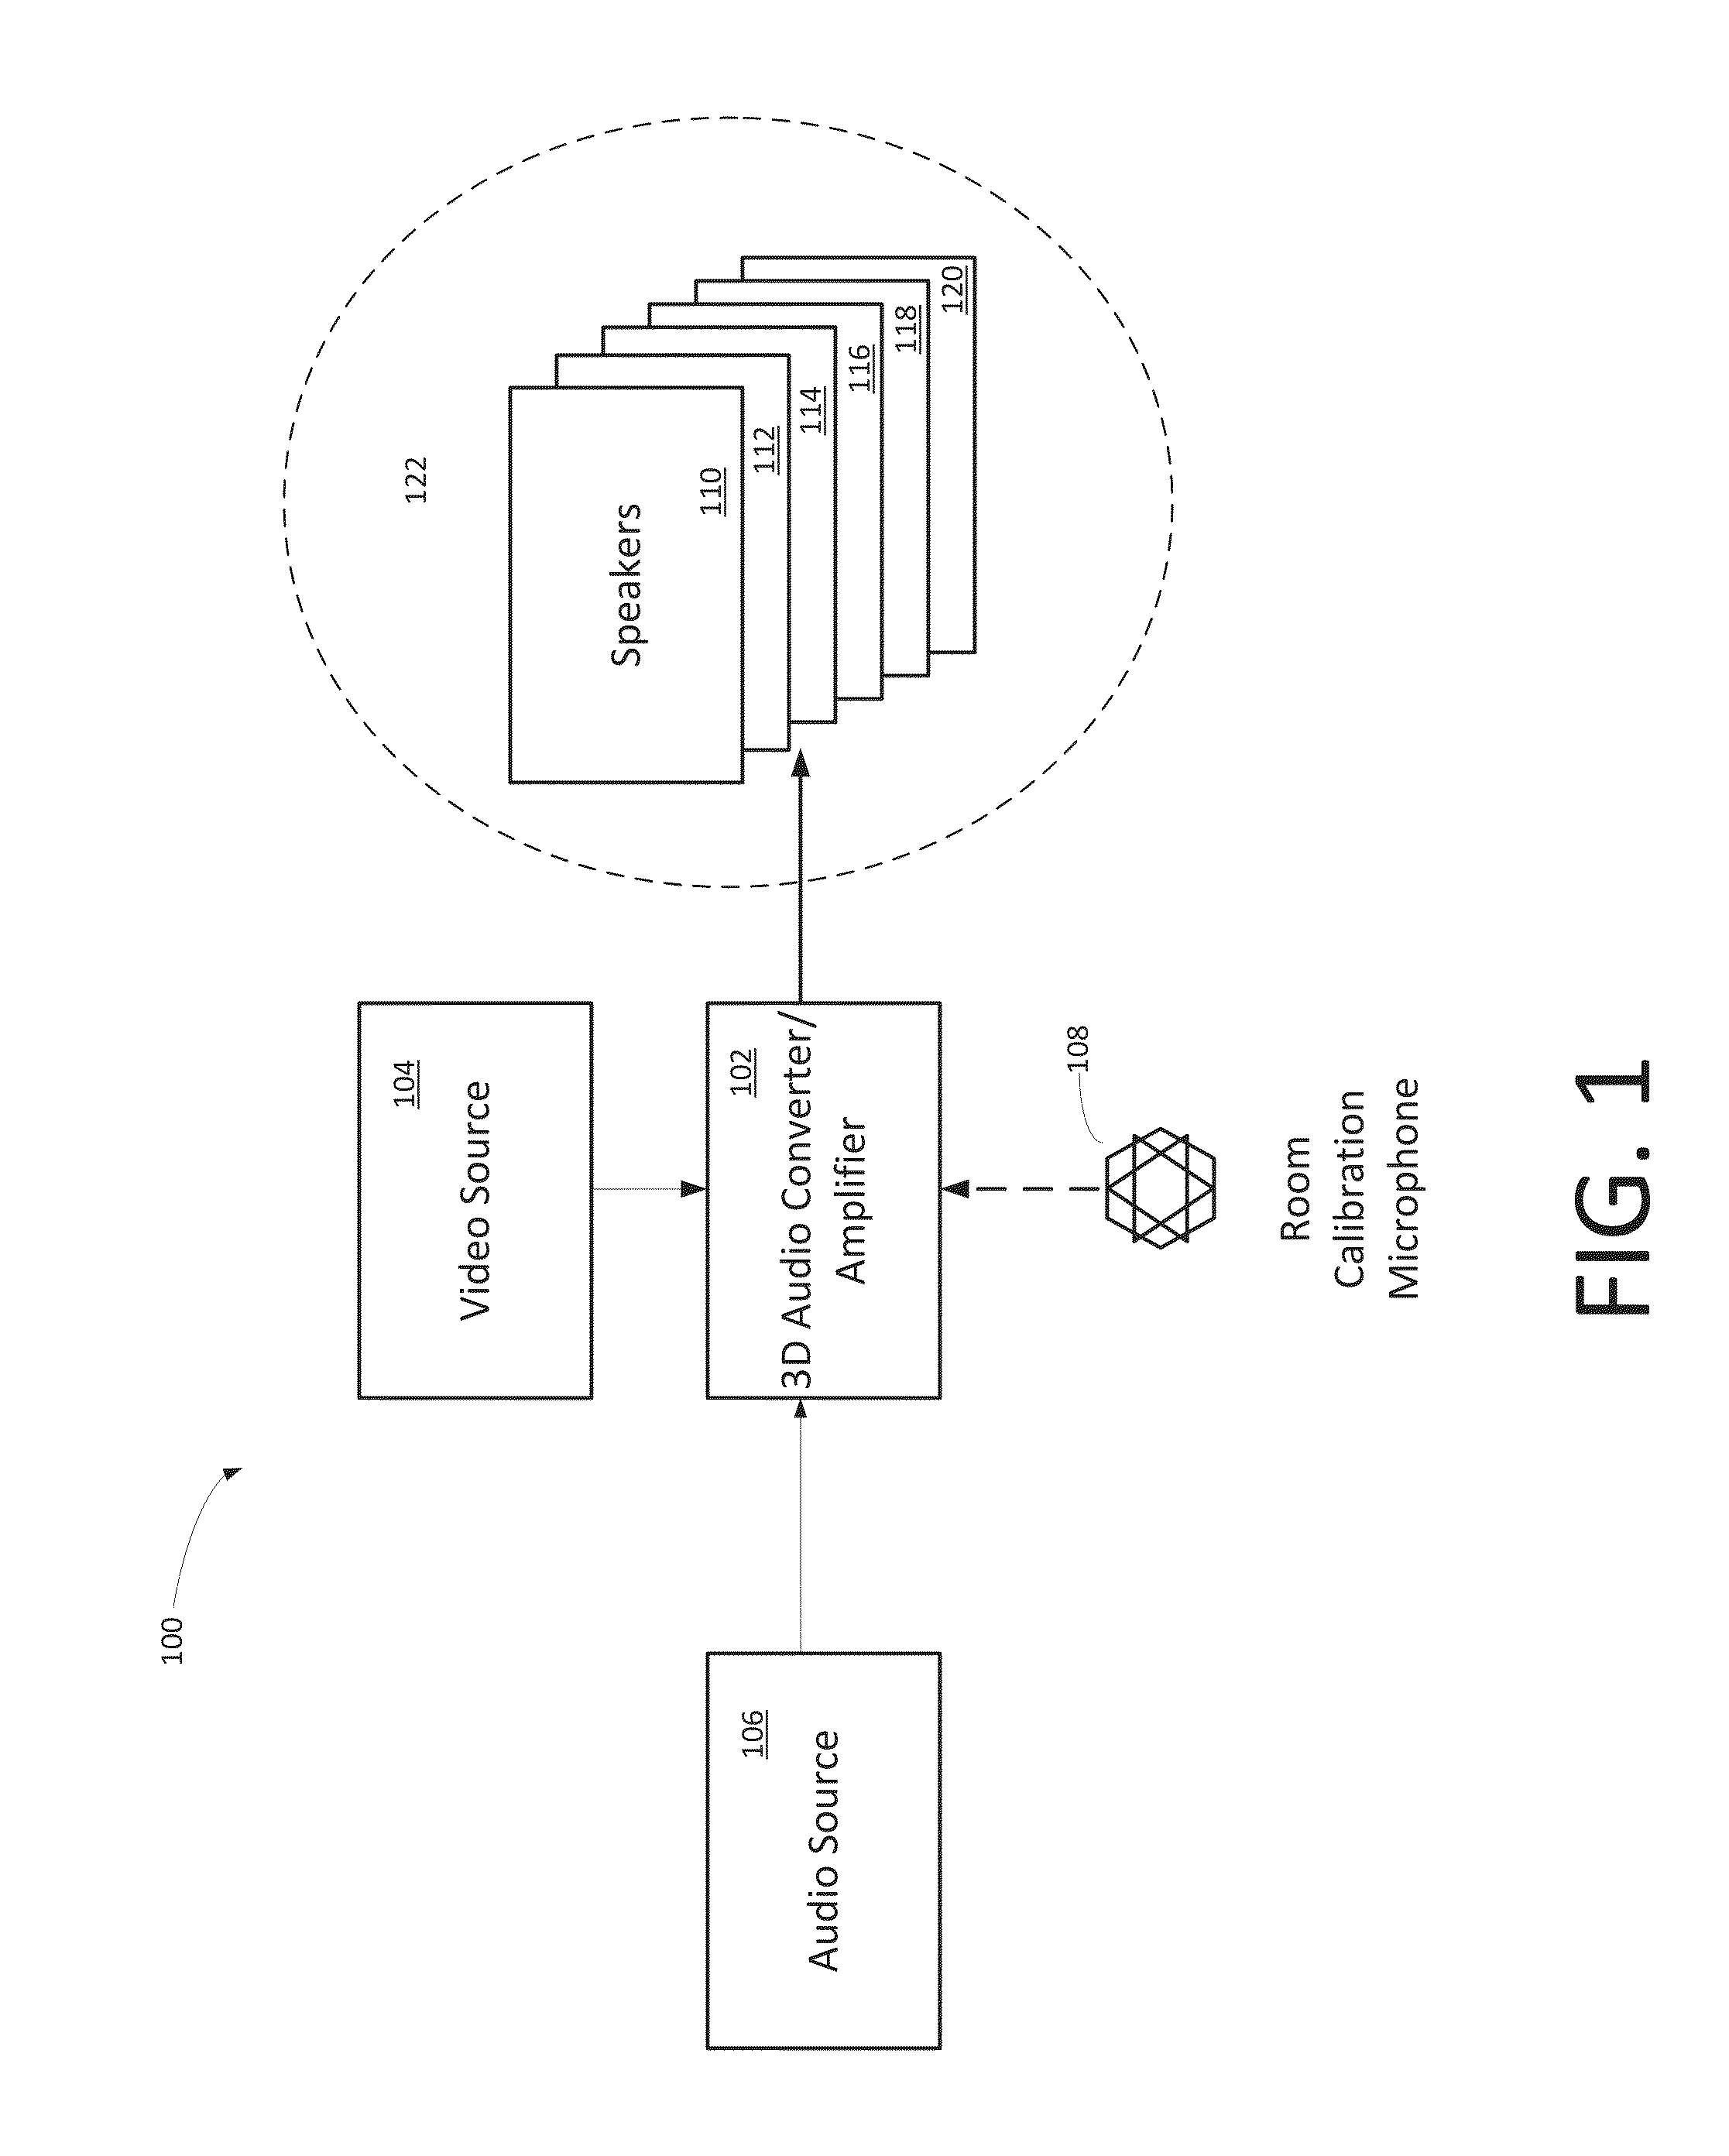 Systems, Methods, and Apparatus for Assigning Three-Dimensional Spatial Data to Sounds and Audio Files